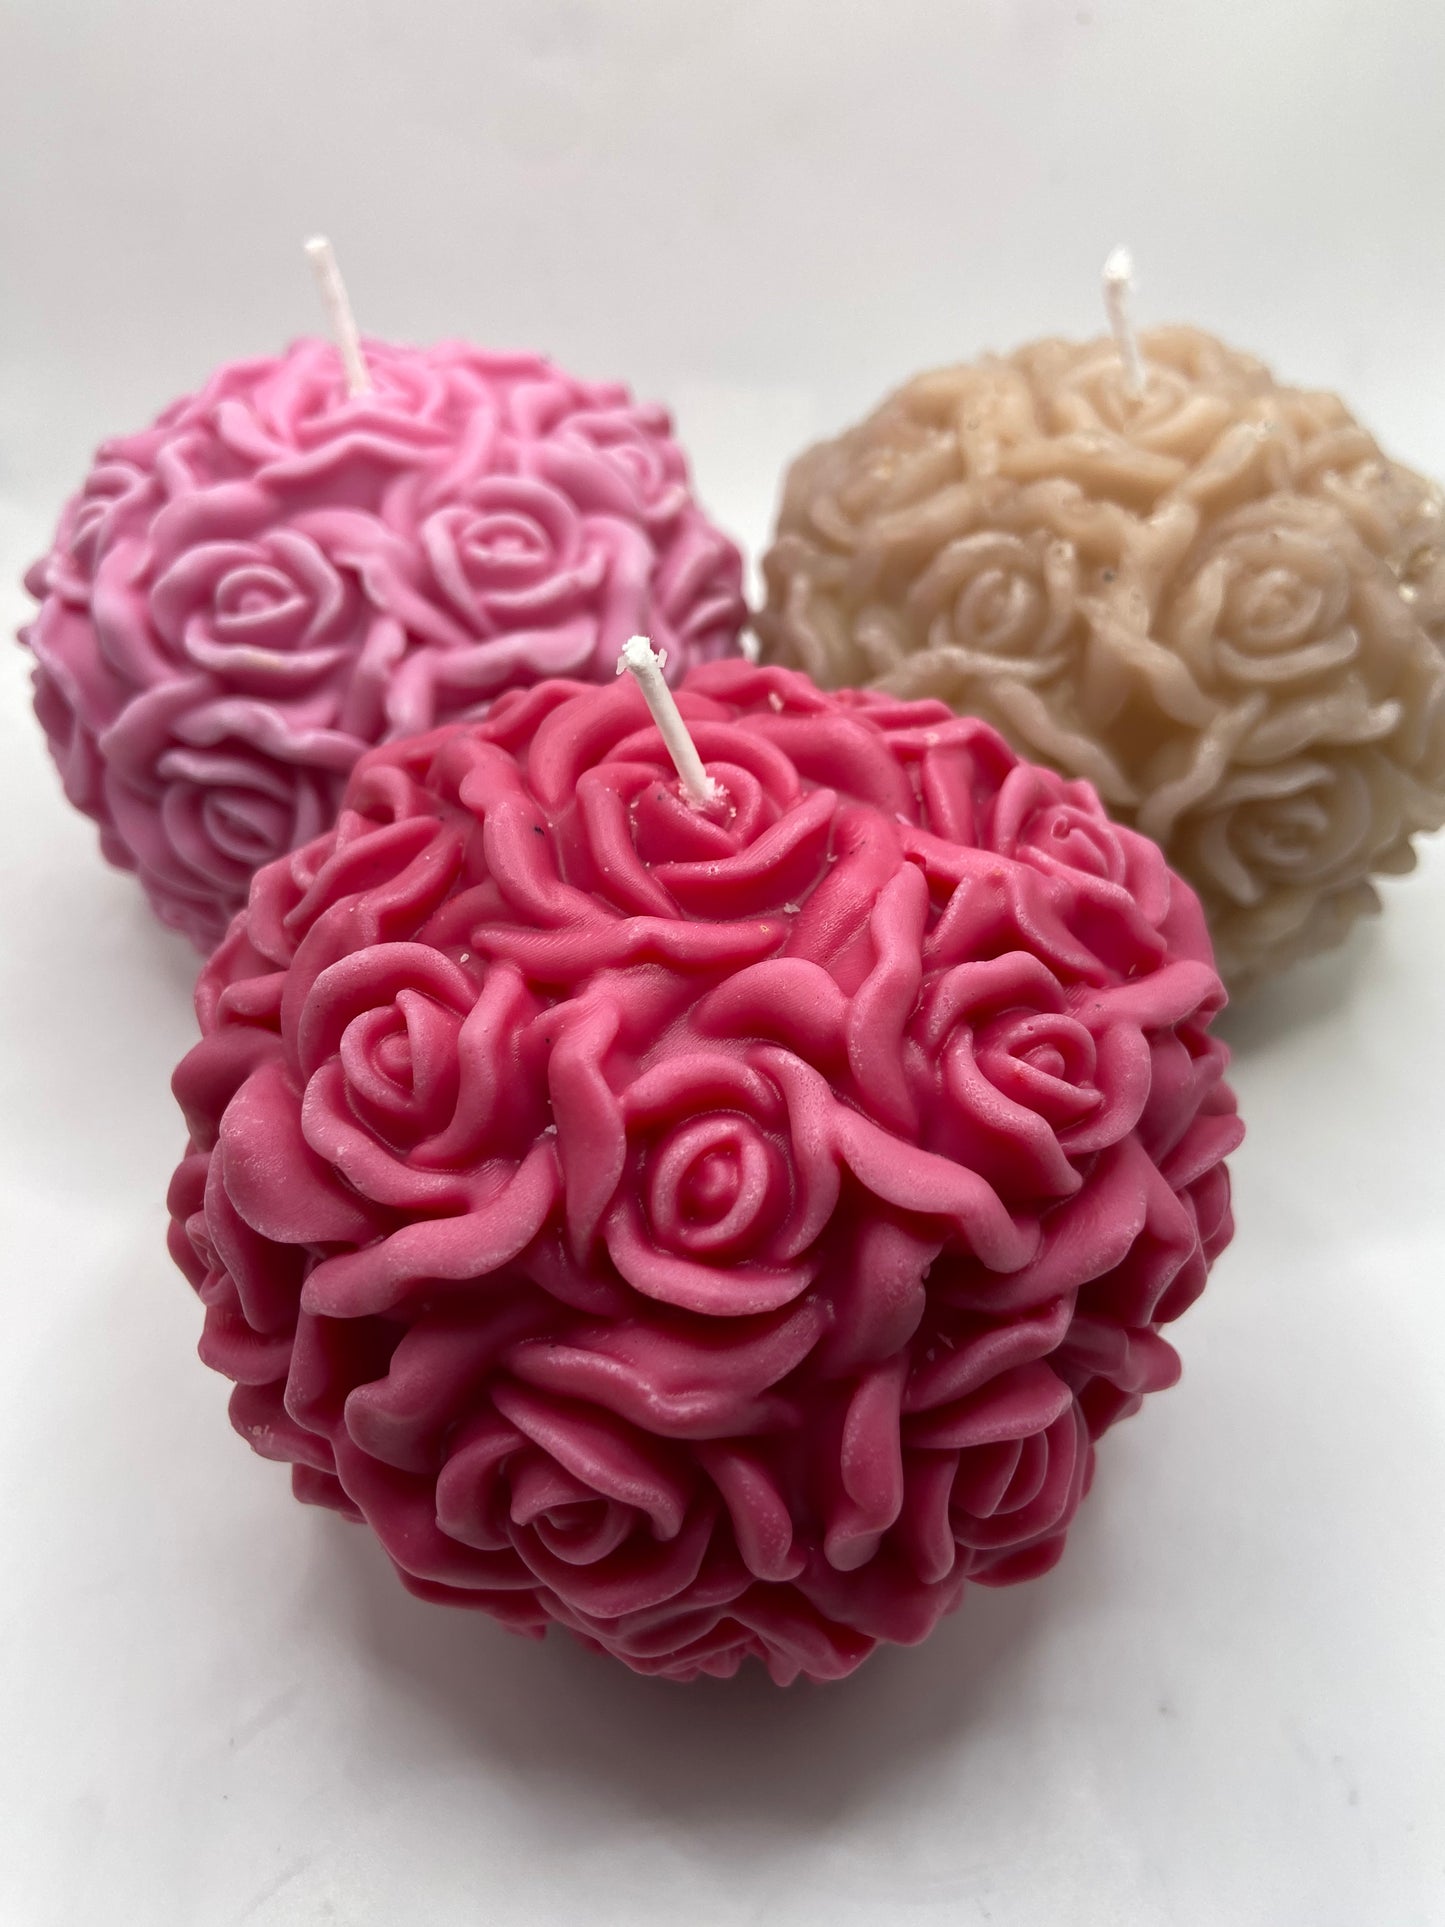 Rose ball candle